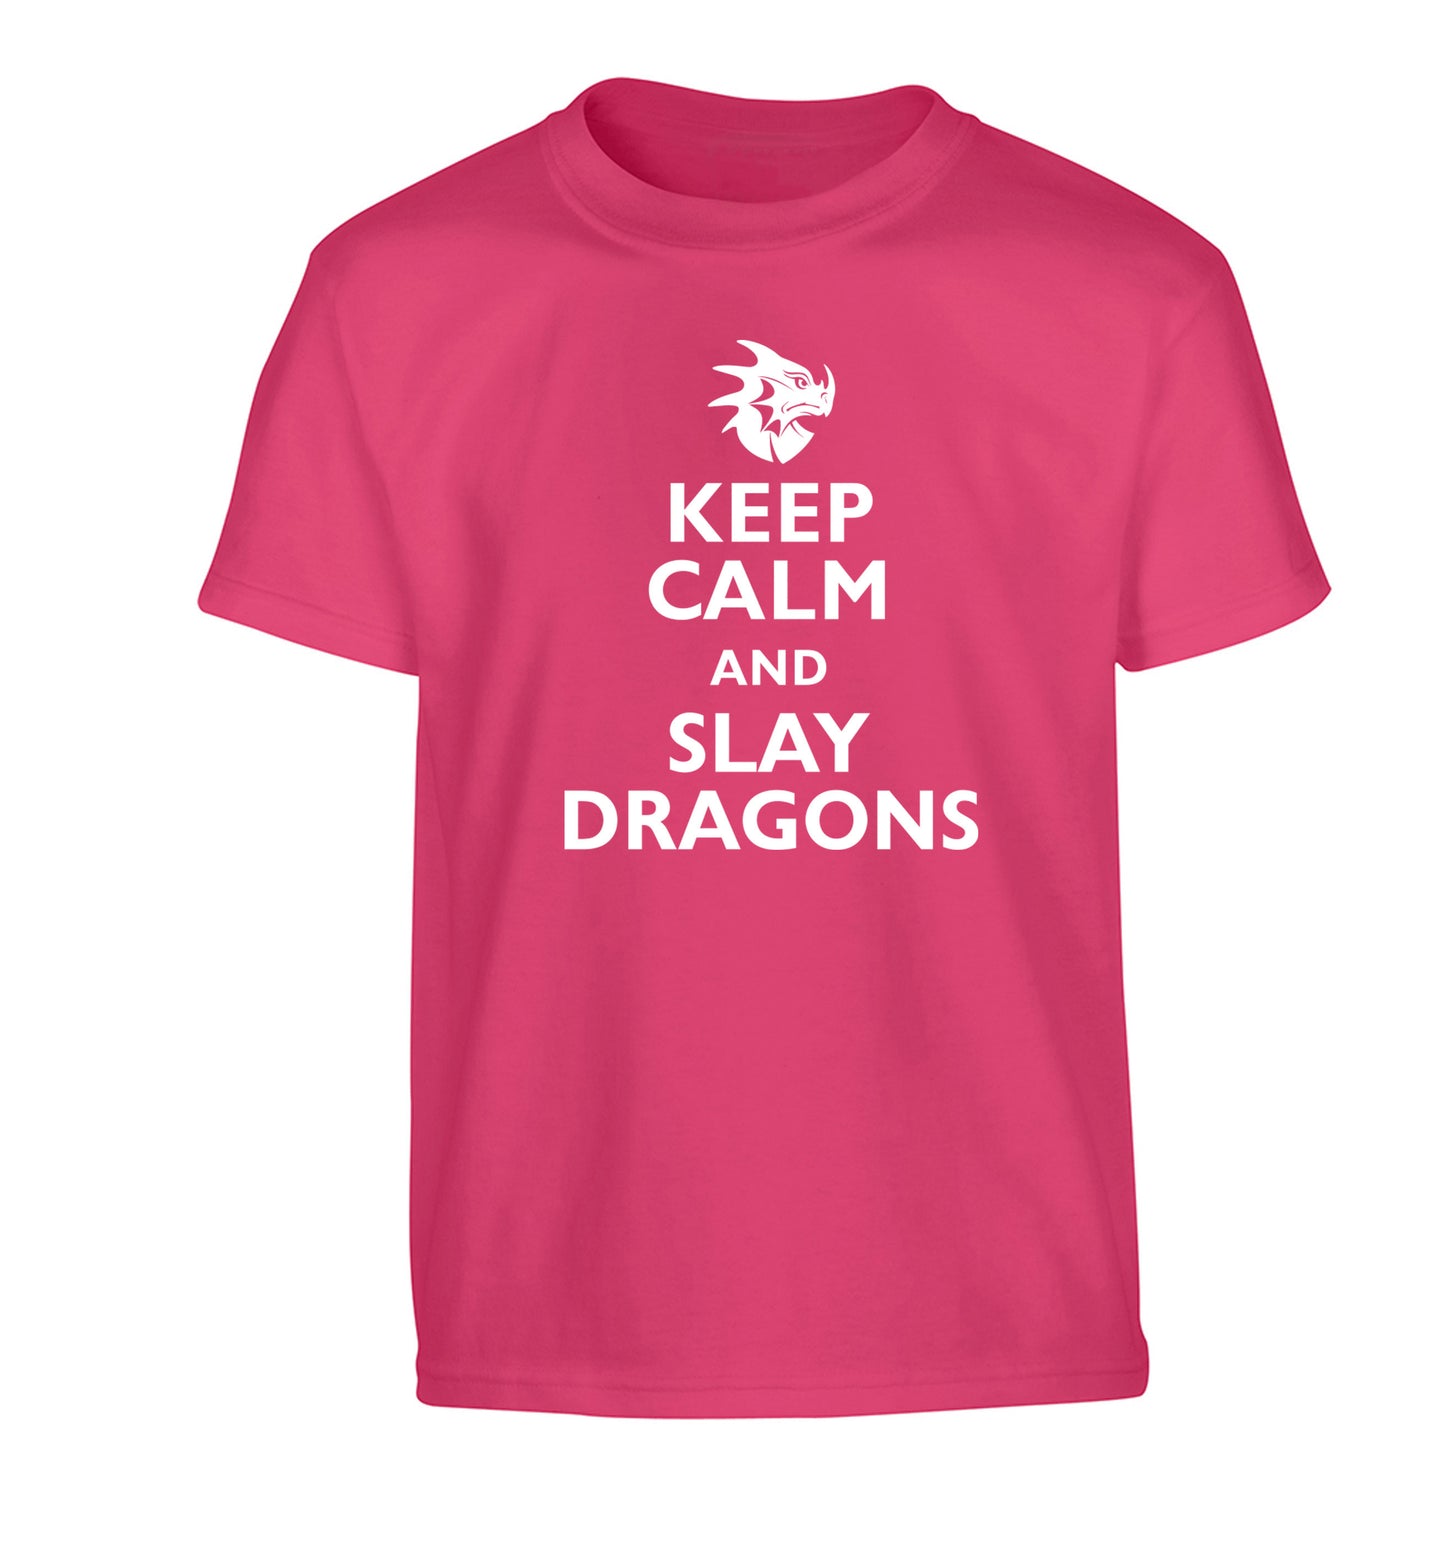 Keep calm and slay dragons Children's pink Tshirt 12-14 Years